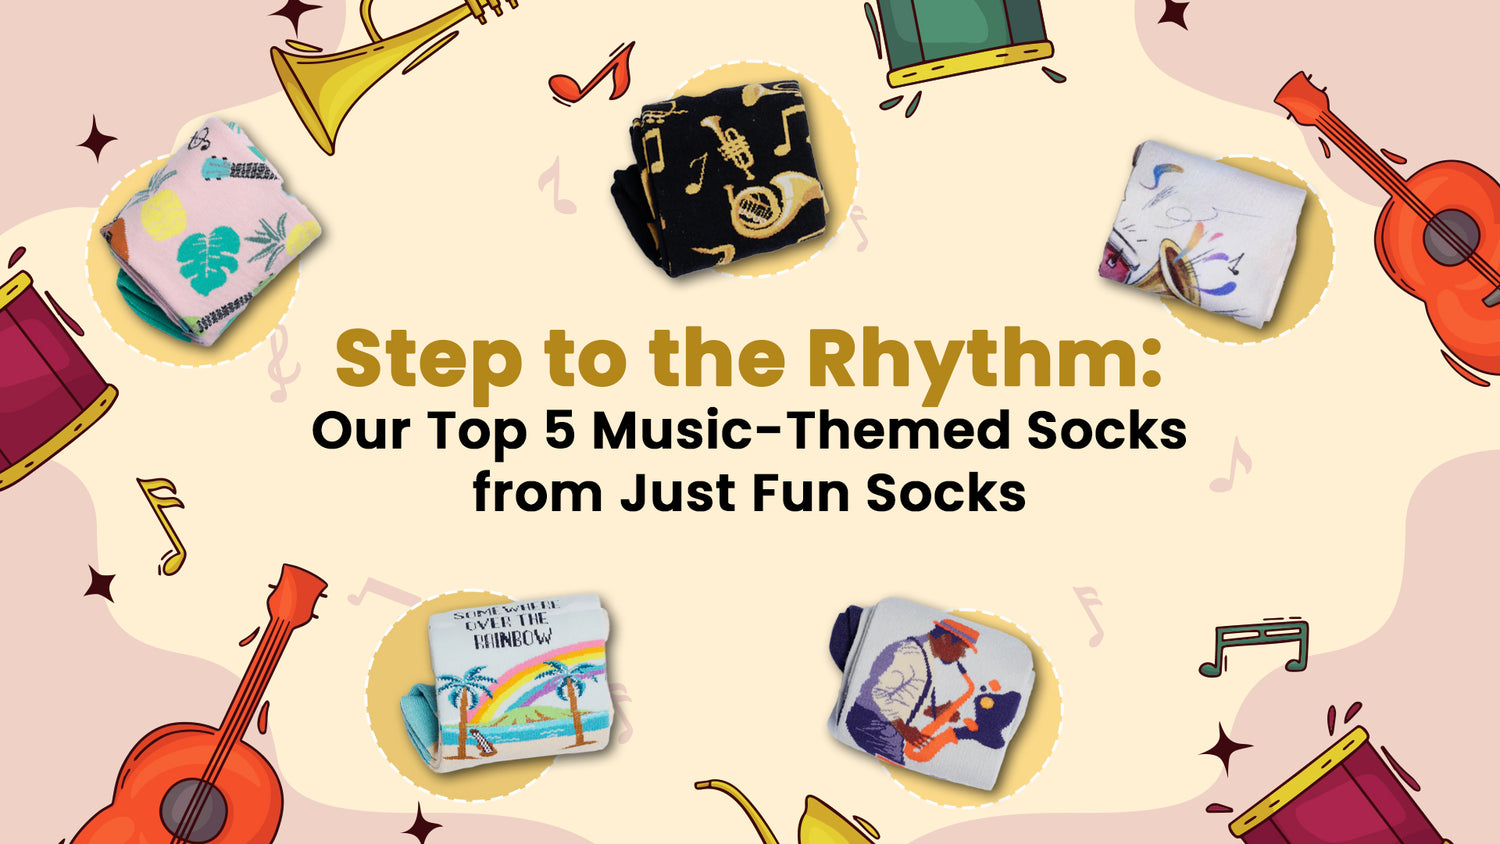 Step to the Rhythm: Our Top 5 Music-Themed Socks from Just Fun Socks